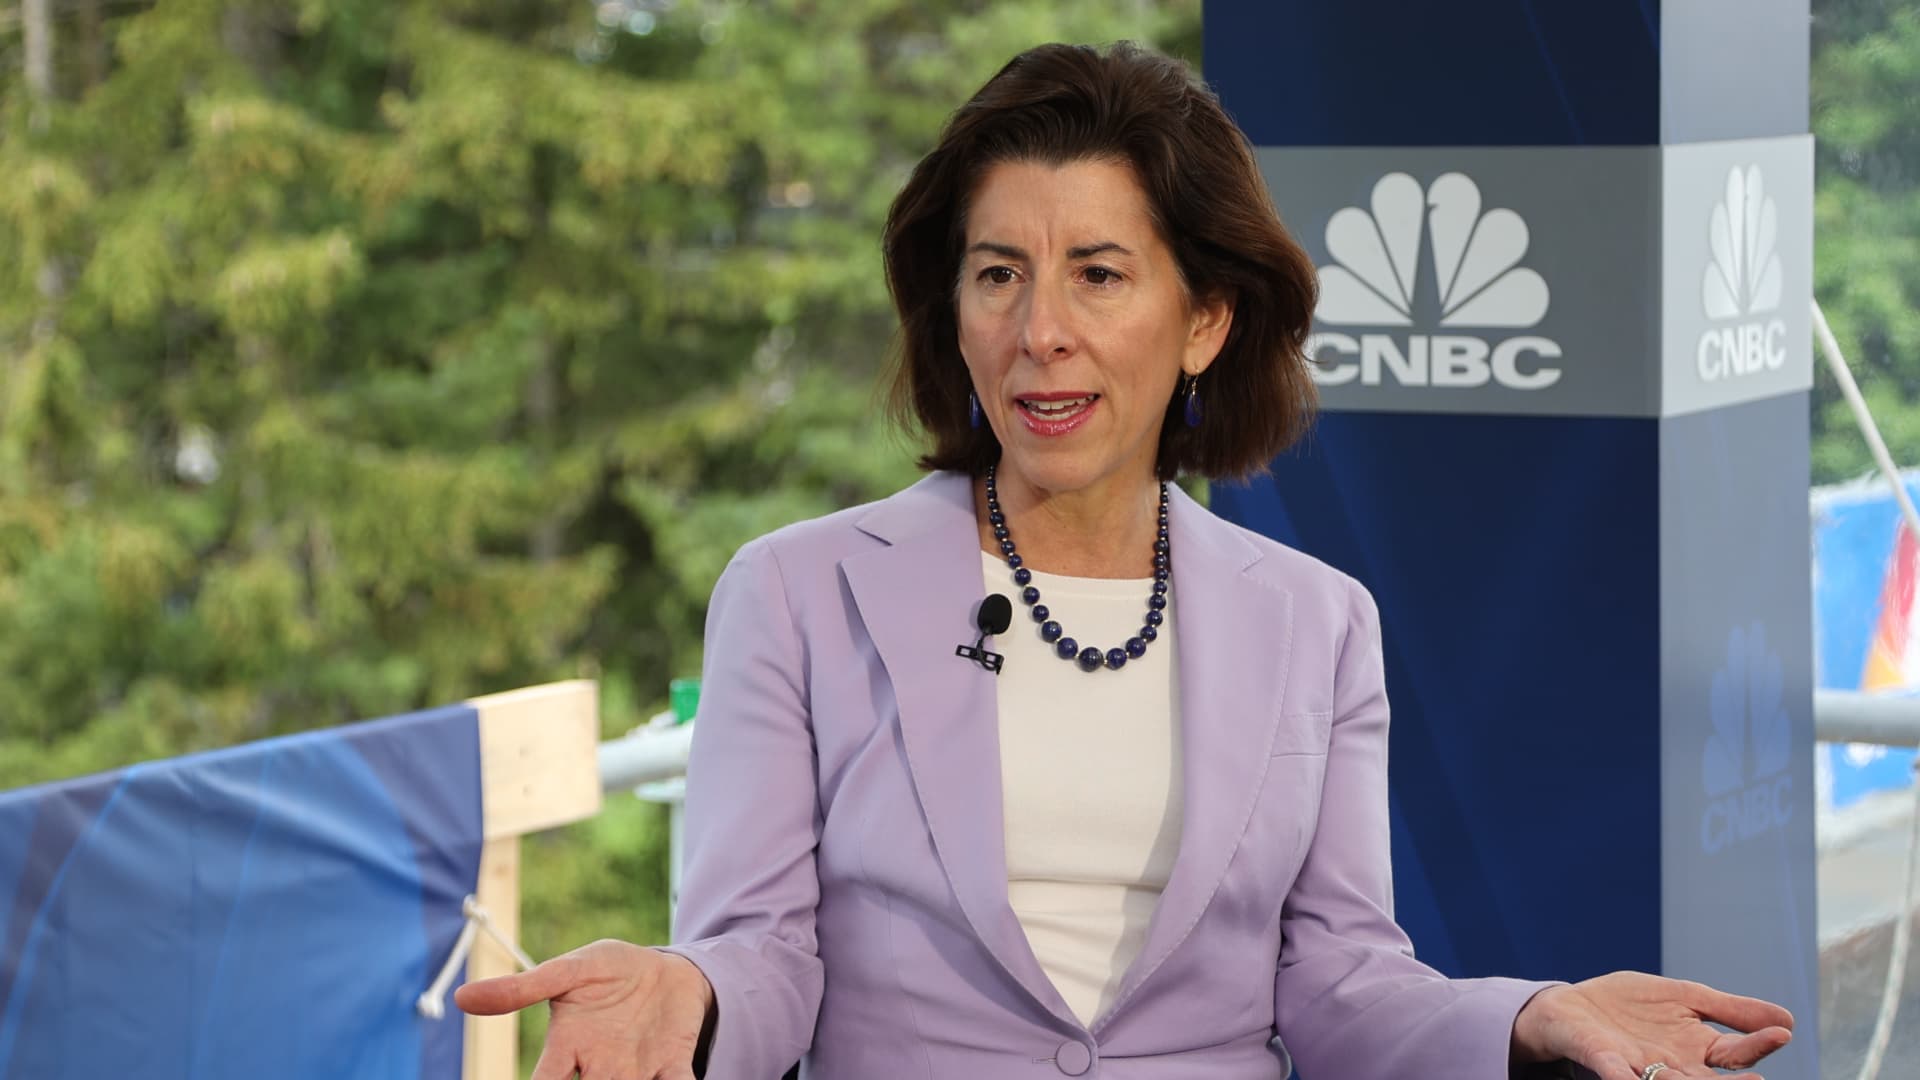 China is a growing threat to national security, U.S. companies and American workers, U.S. Commerce Secretary Raimondo says